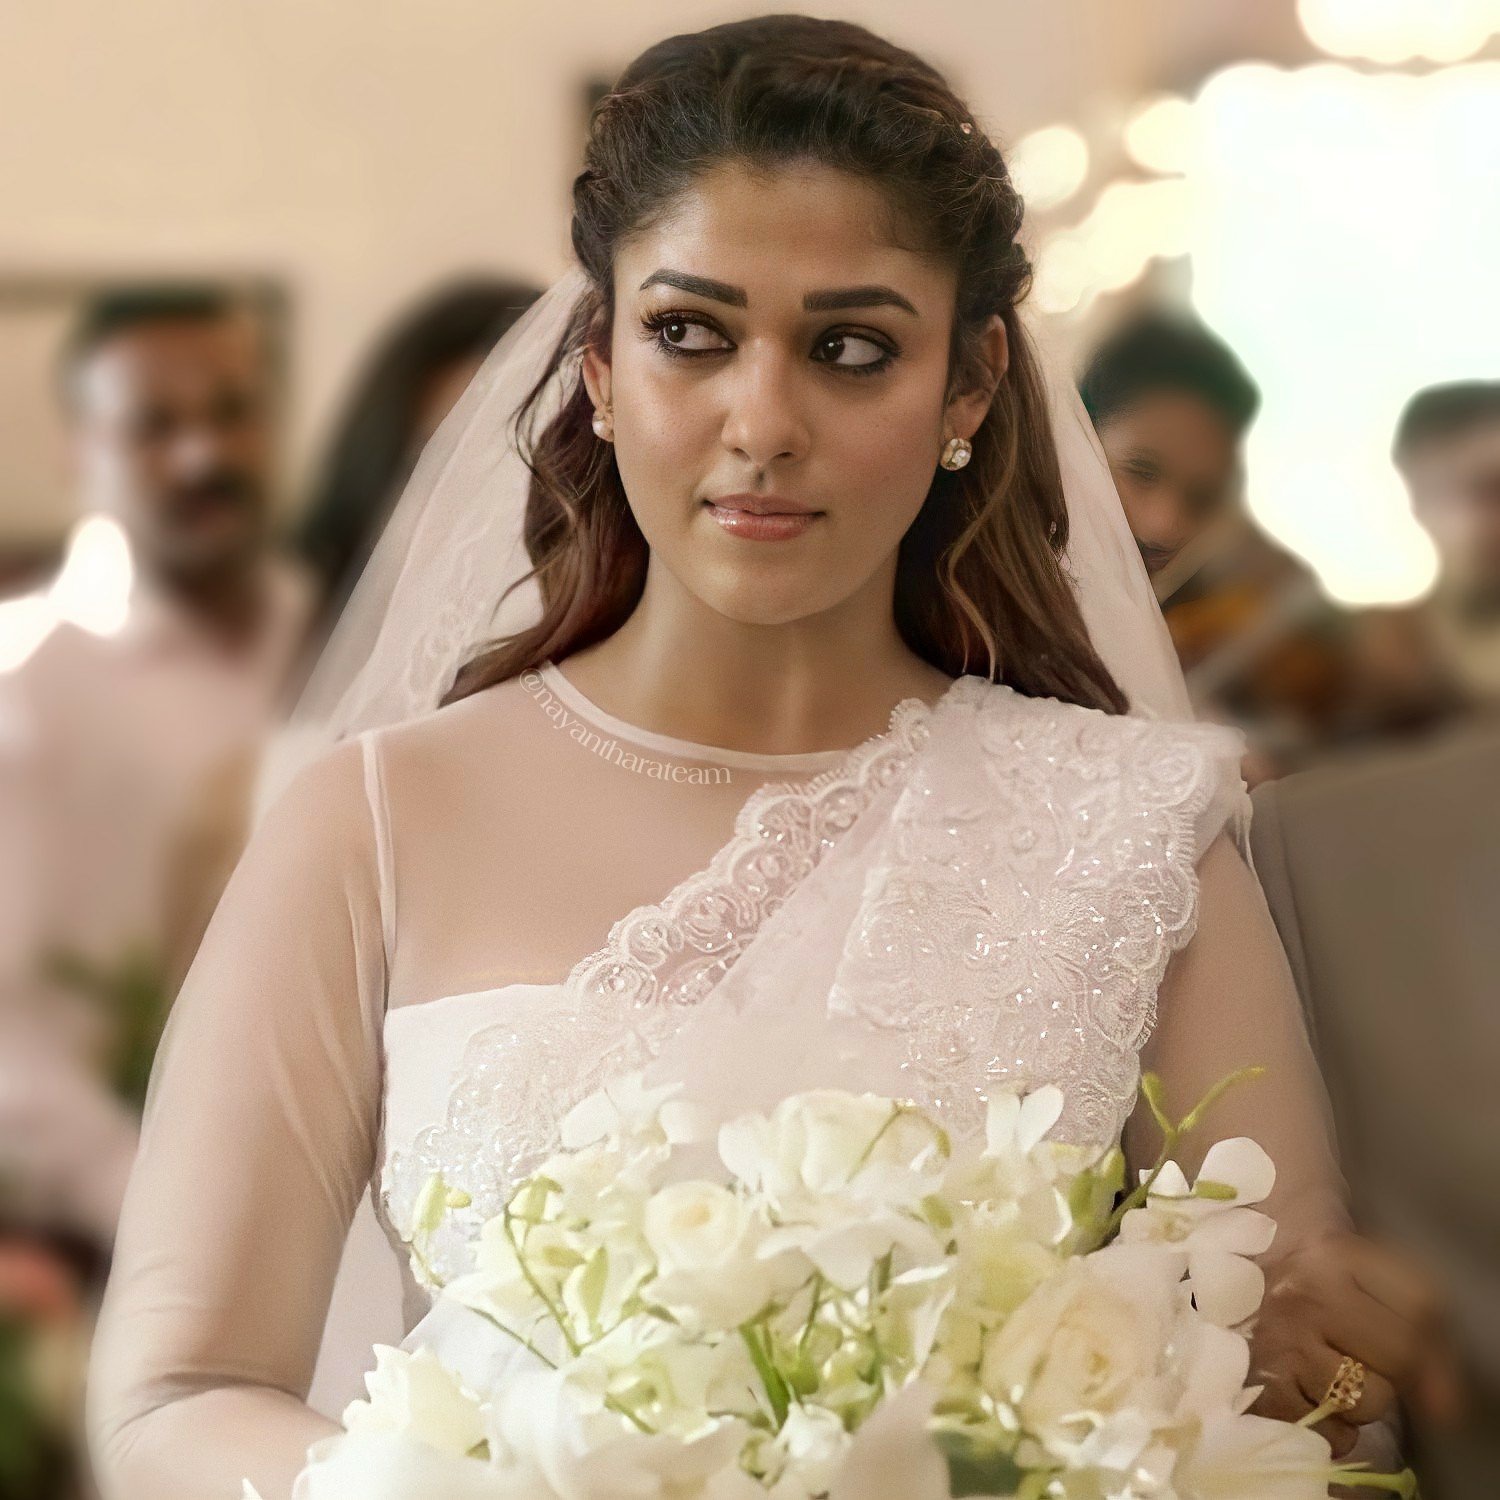 From Bigil to Chandramukhi, Nayanthara Top 10 Highest Grossing Movies so far